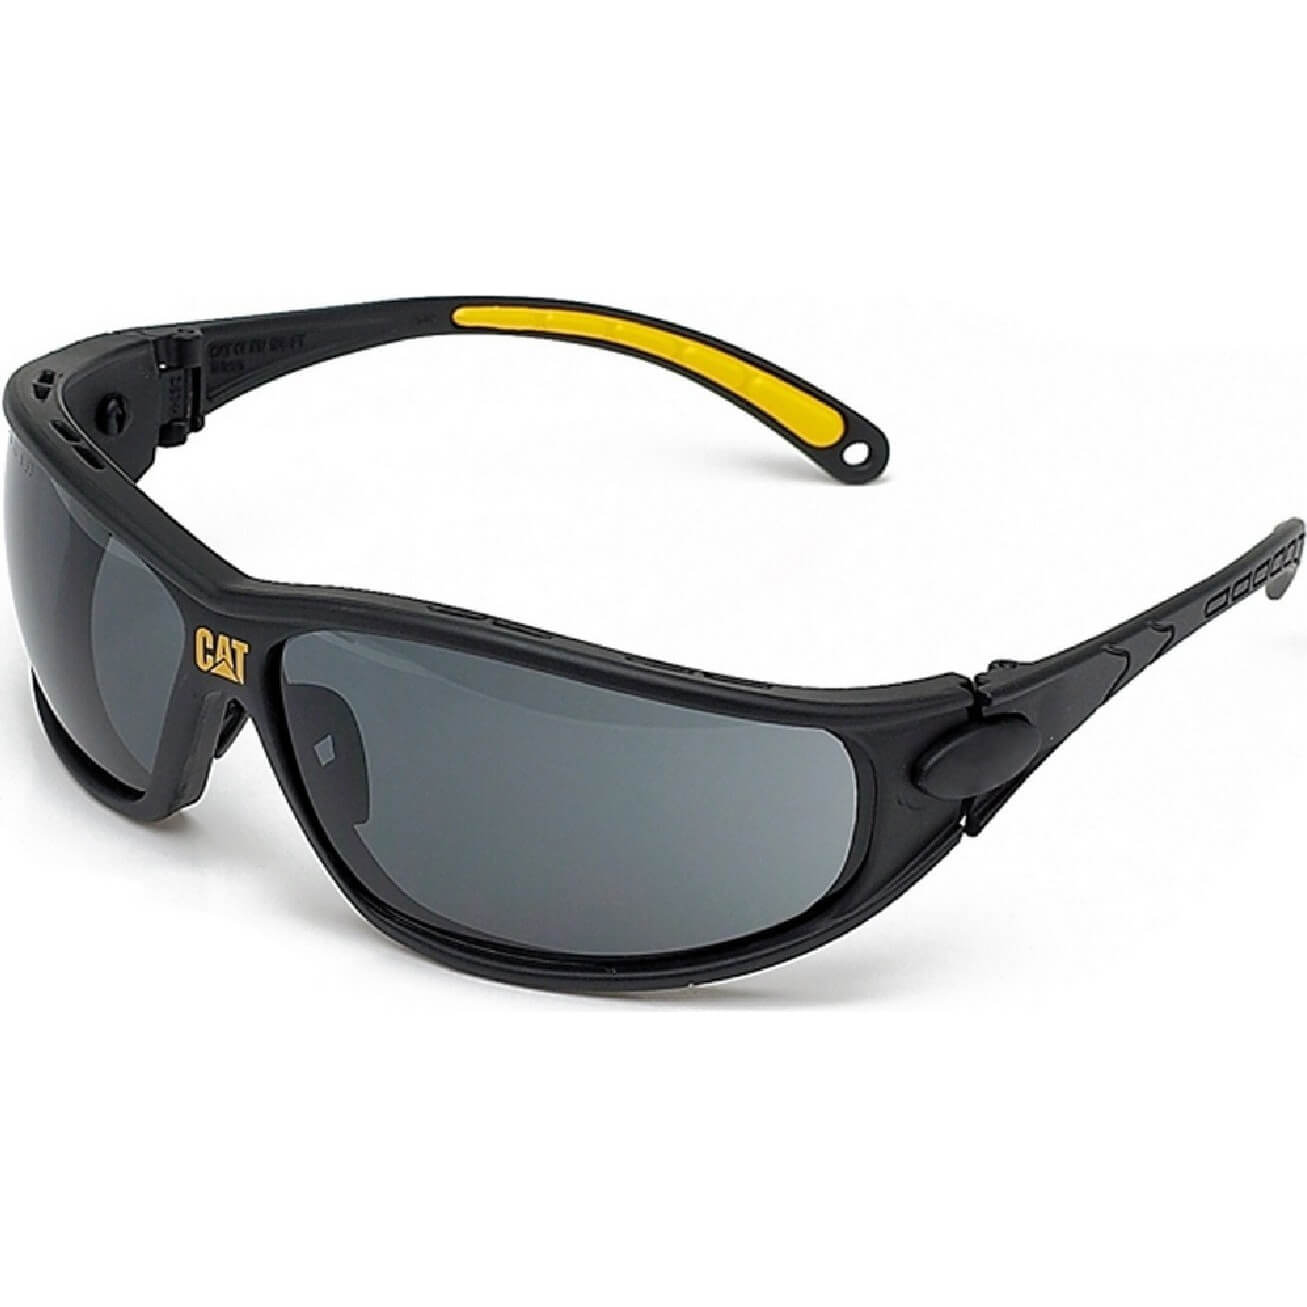 Image of Caterpillar Tread Protective Safety Glasses Blue